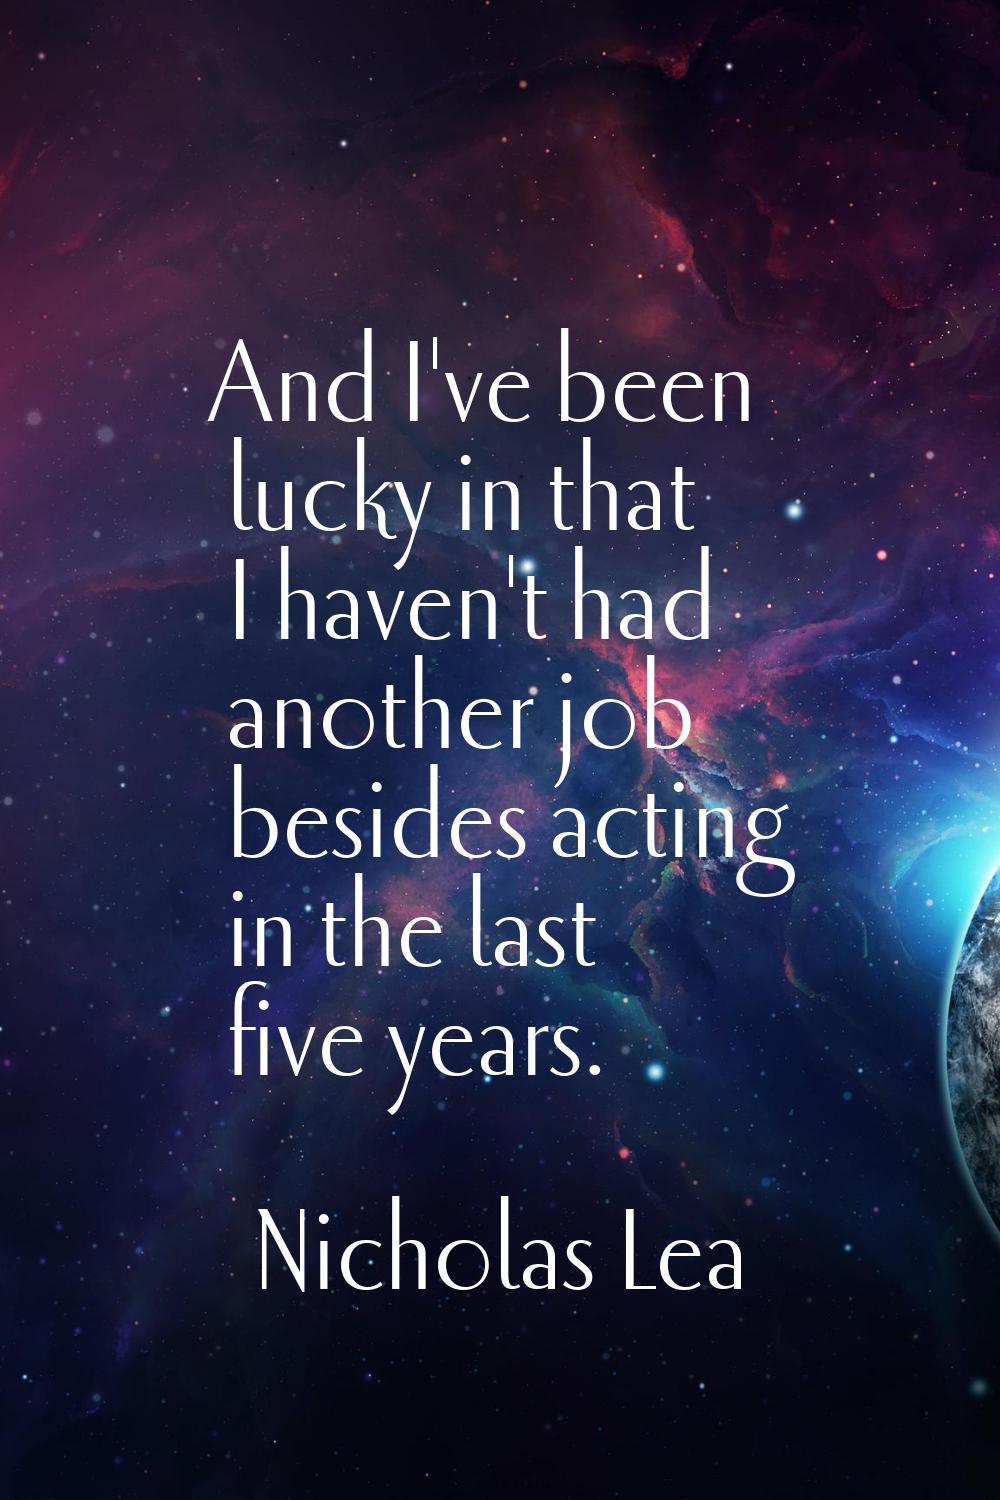 And I've been lucky in that I haven't had another job besides acting in the last five years.